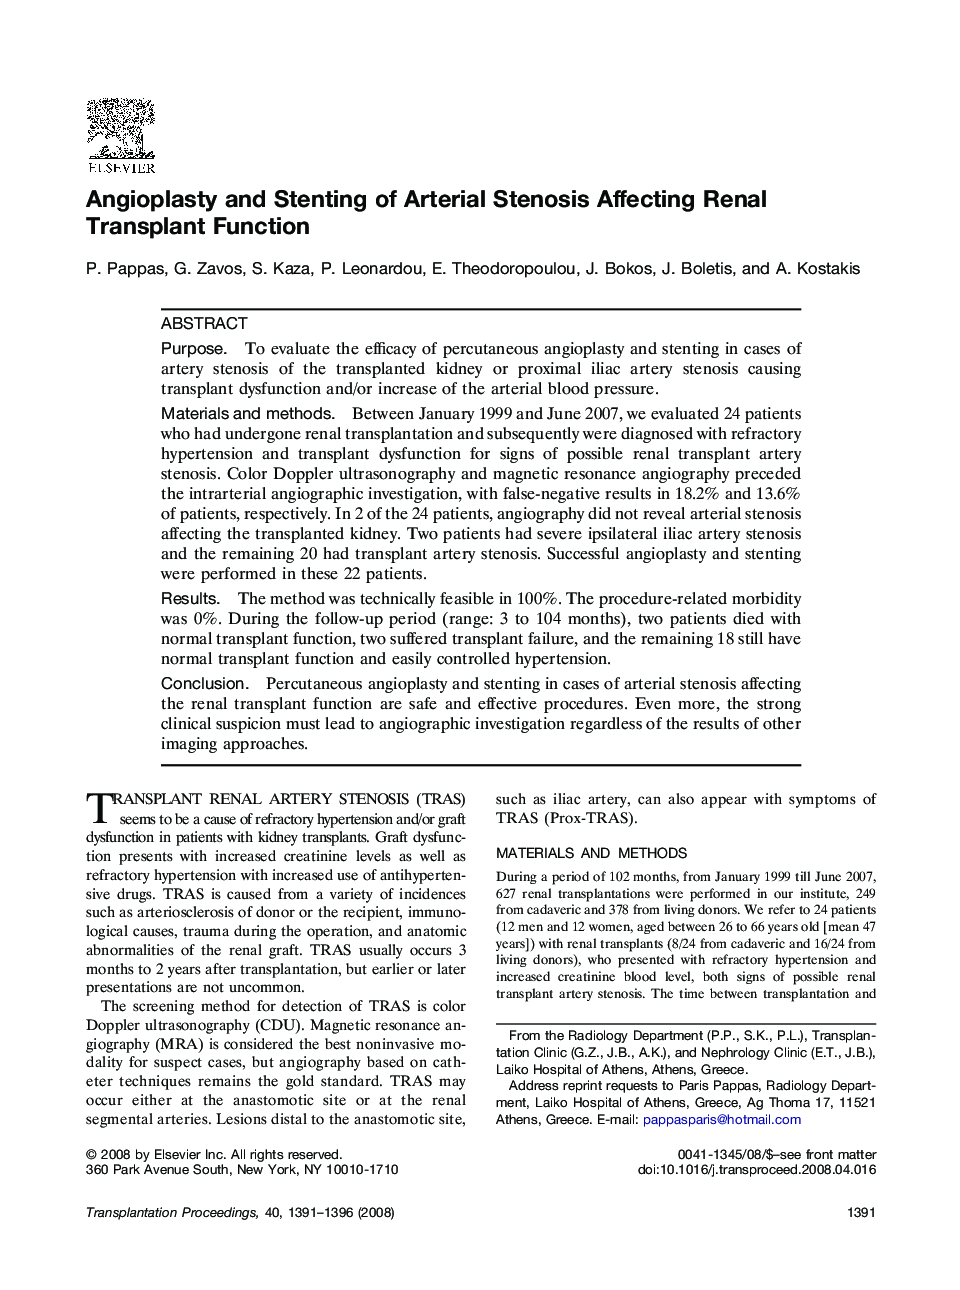 Angioplasty and Stenting of Arterial Stenosis Affecting Renal Transplant Function